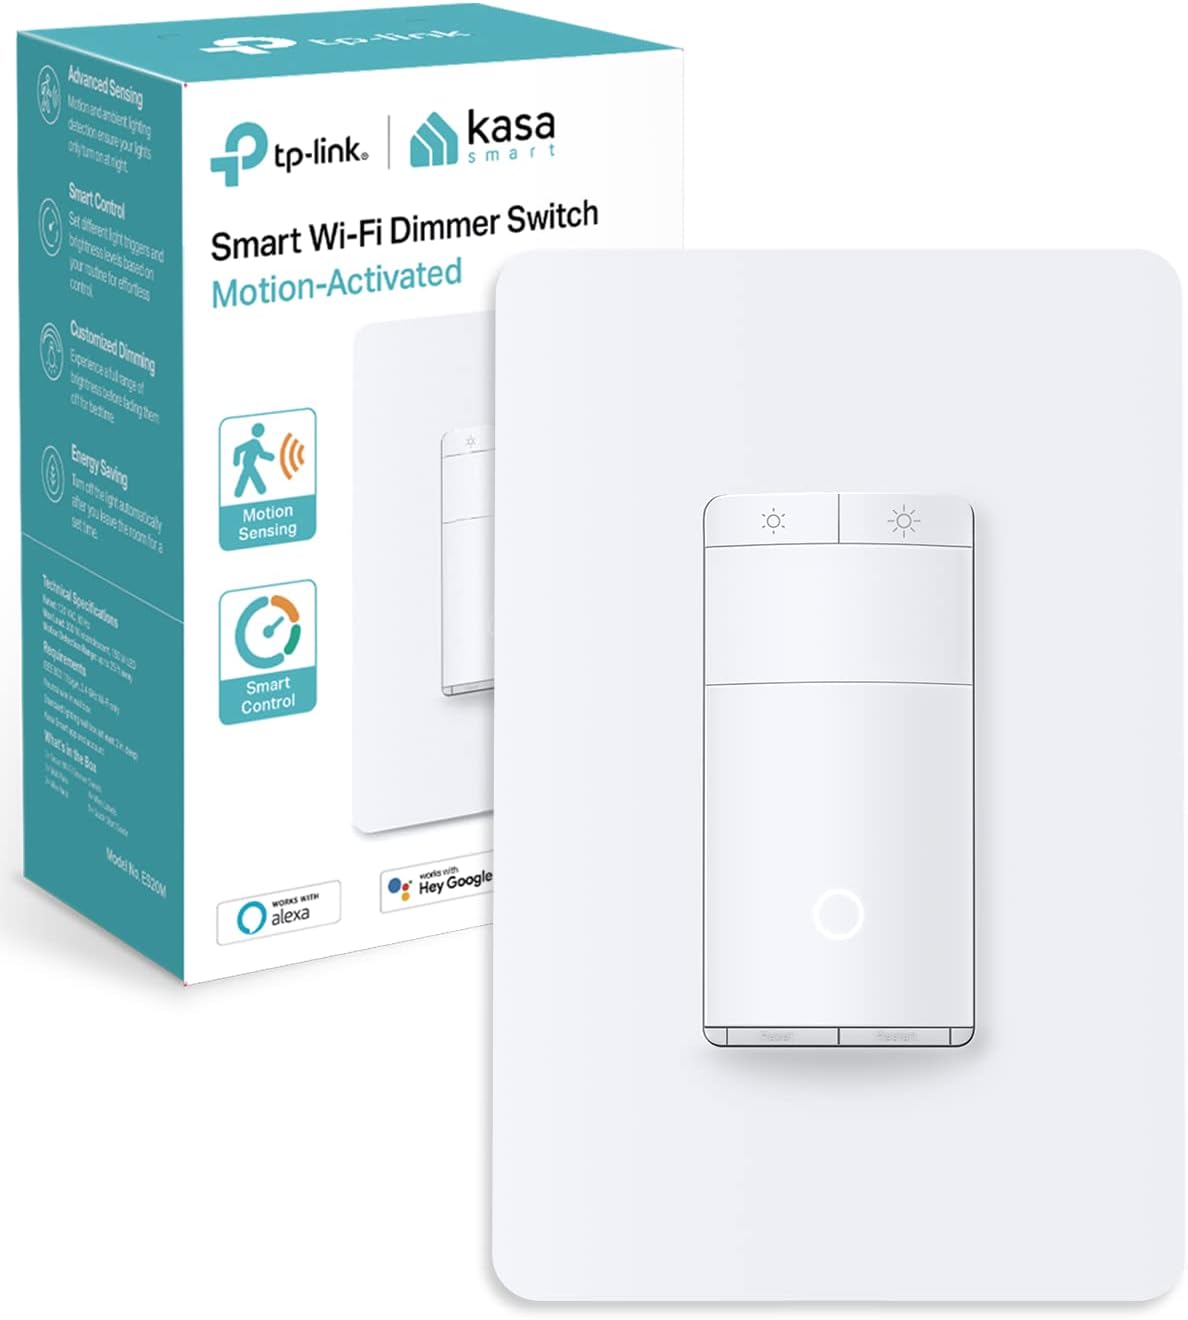 Limited-time deal: Kasa Smart Motion Sensor Switch, Dimmer Light Switch, Single Pole, Needs Neutral Wire, 2.4GHz Wi-Fi, Compatible with Alexa & Google Assistant, UL Certi - $22.99